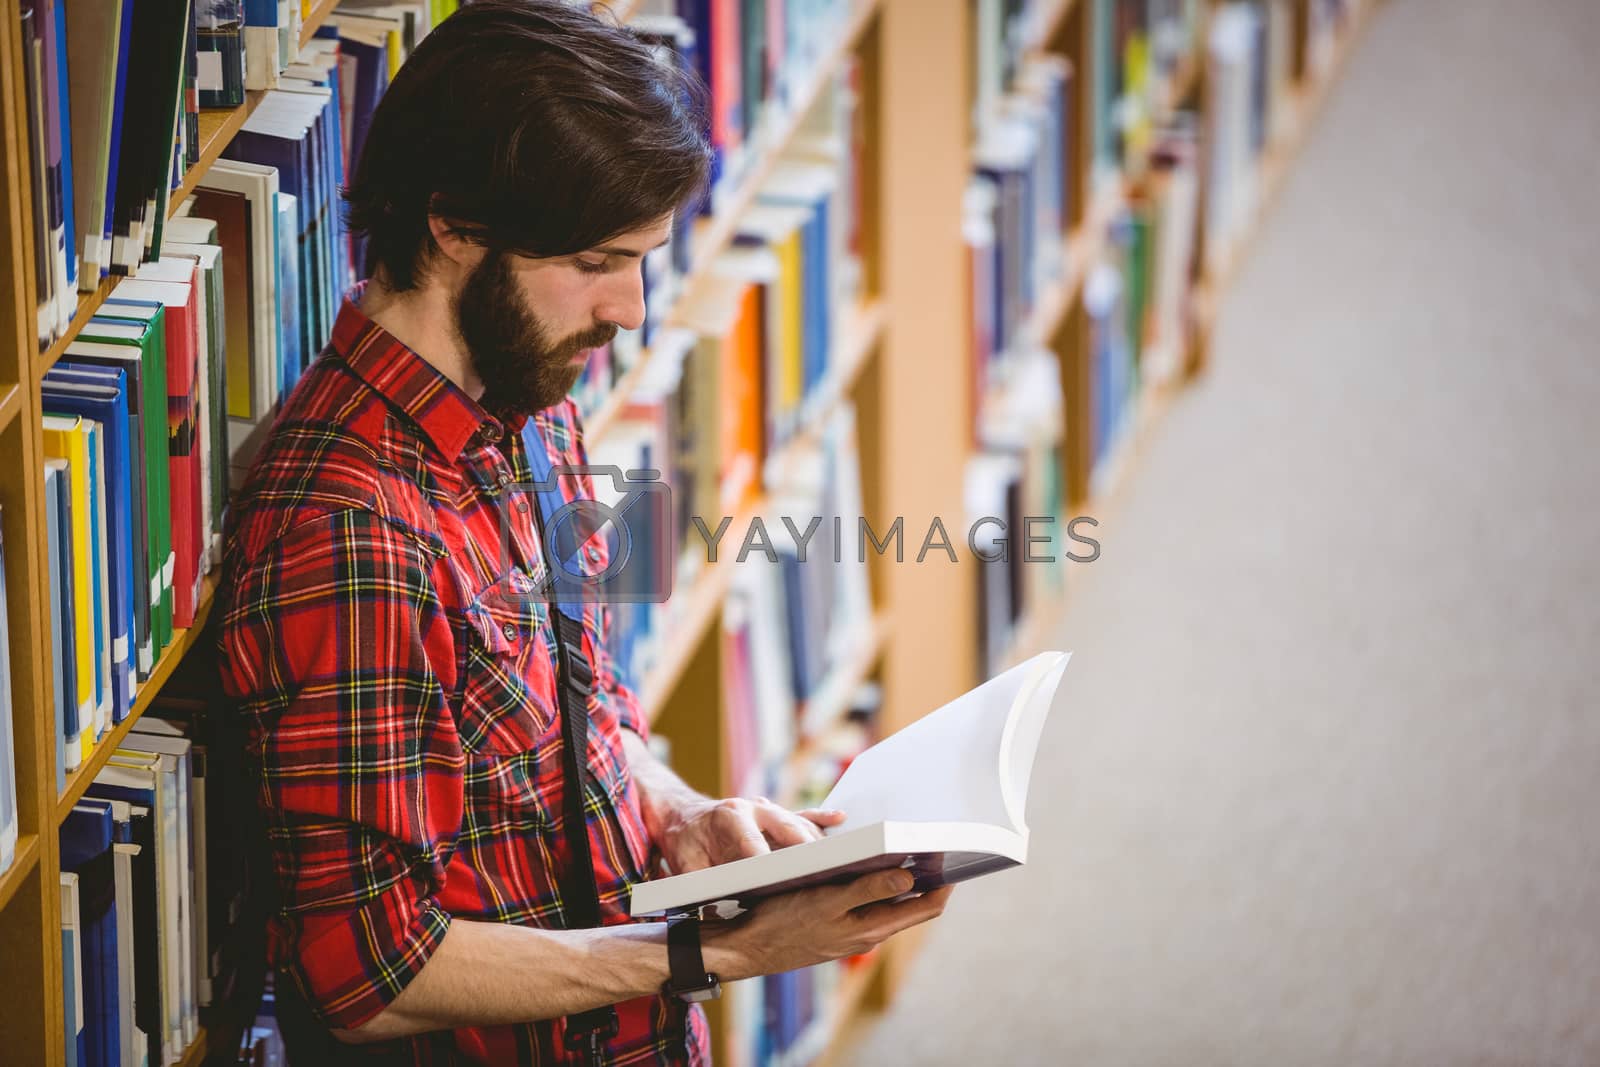 Royalty free image of Student reading a book from shelf in library by Wavebreakmedia